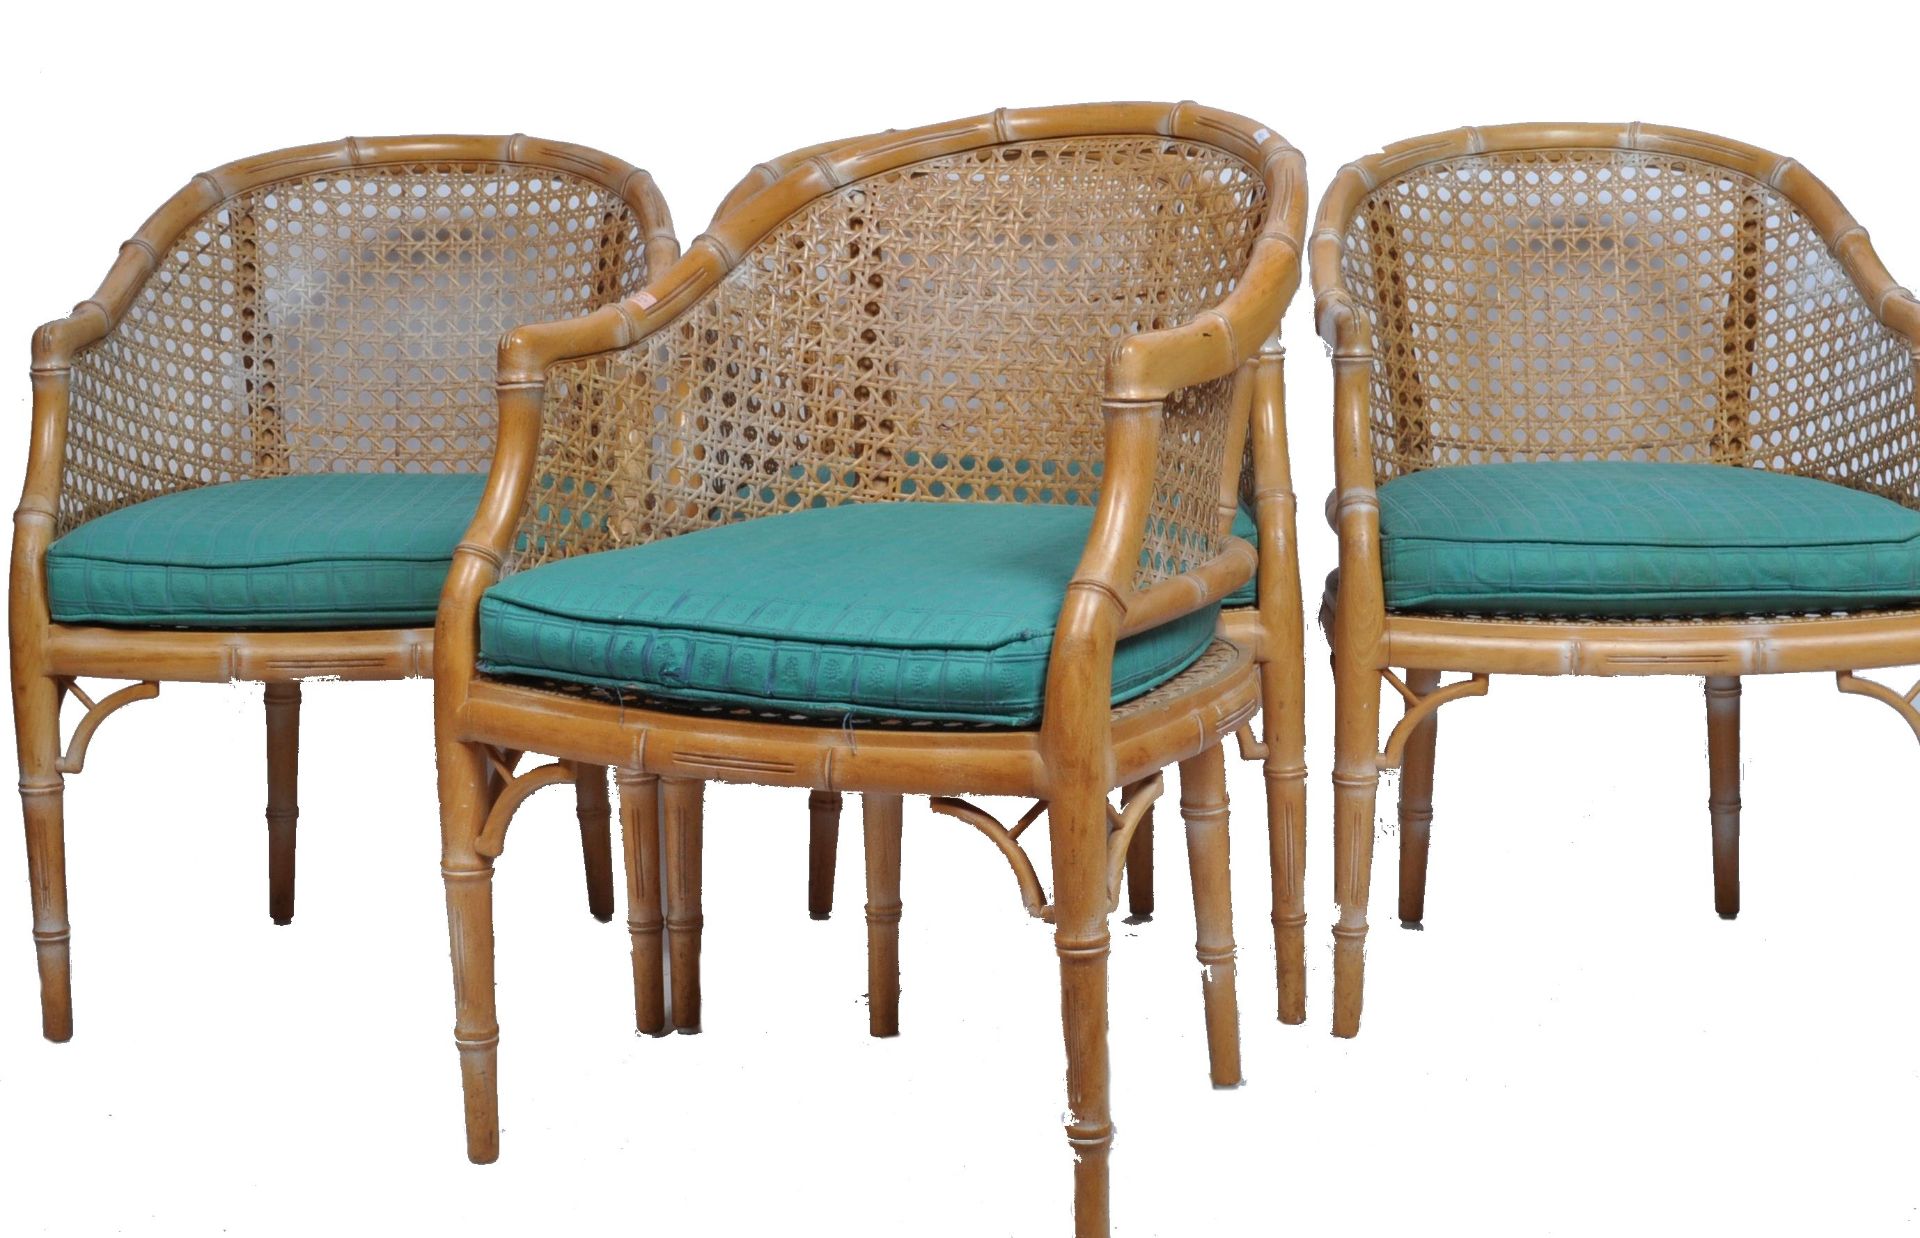 GIORGETTI MANNER RETRO VINTAGE CIRCA 1970S BAMBOO DINING CHAIRS